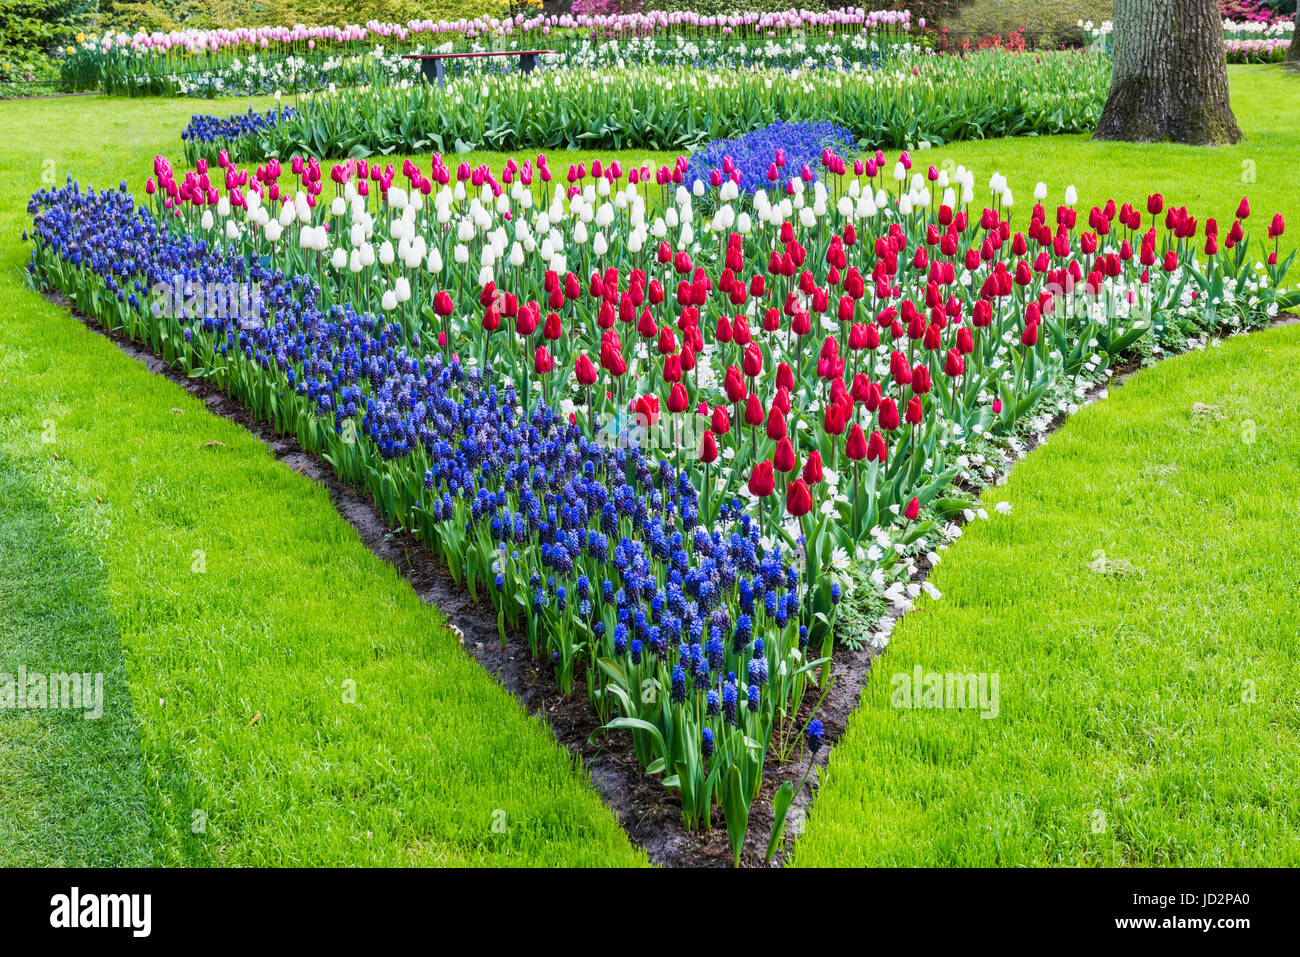 Flower garden with multi-colored tulips and Grape Hyacinths in bloom, Keukenhof Gardens Exhibit, Lisse, South Holland, The Netherlands Stock Photo